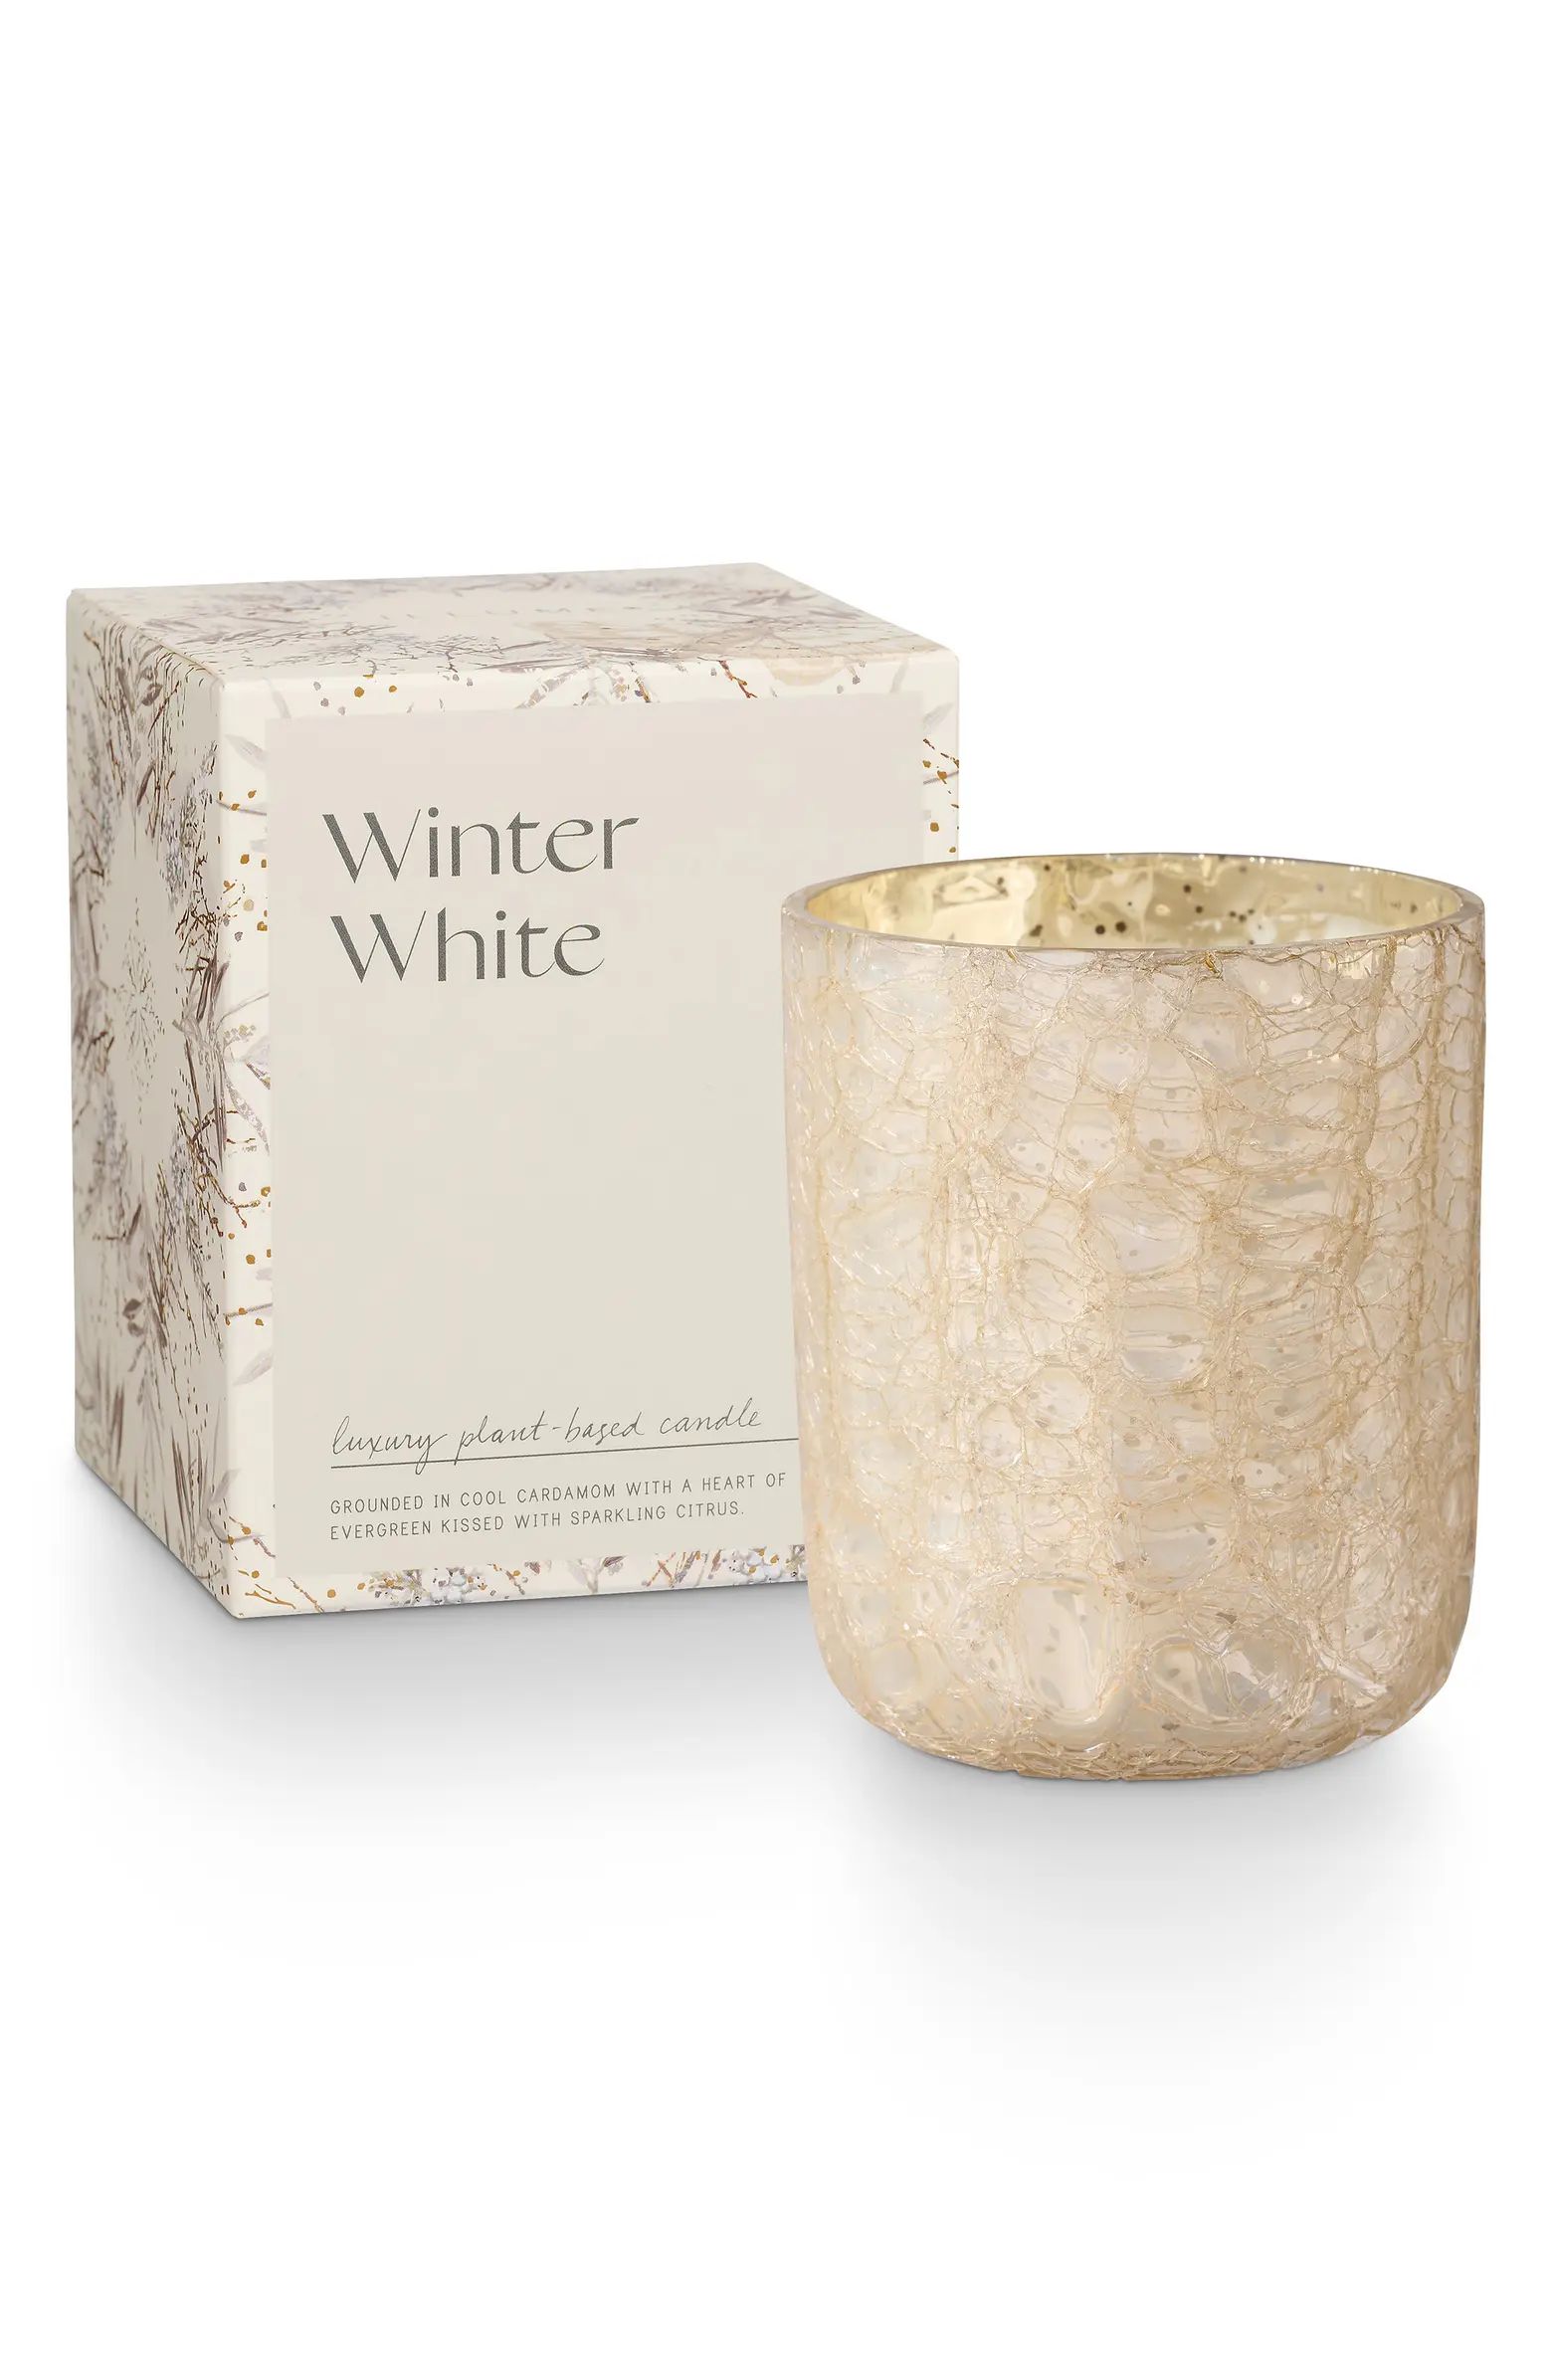 ILLUME® Winter White Mercury Glass Candle | Nordstrom | Nordstrom